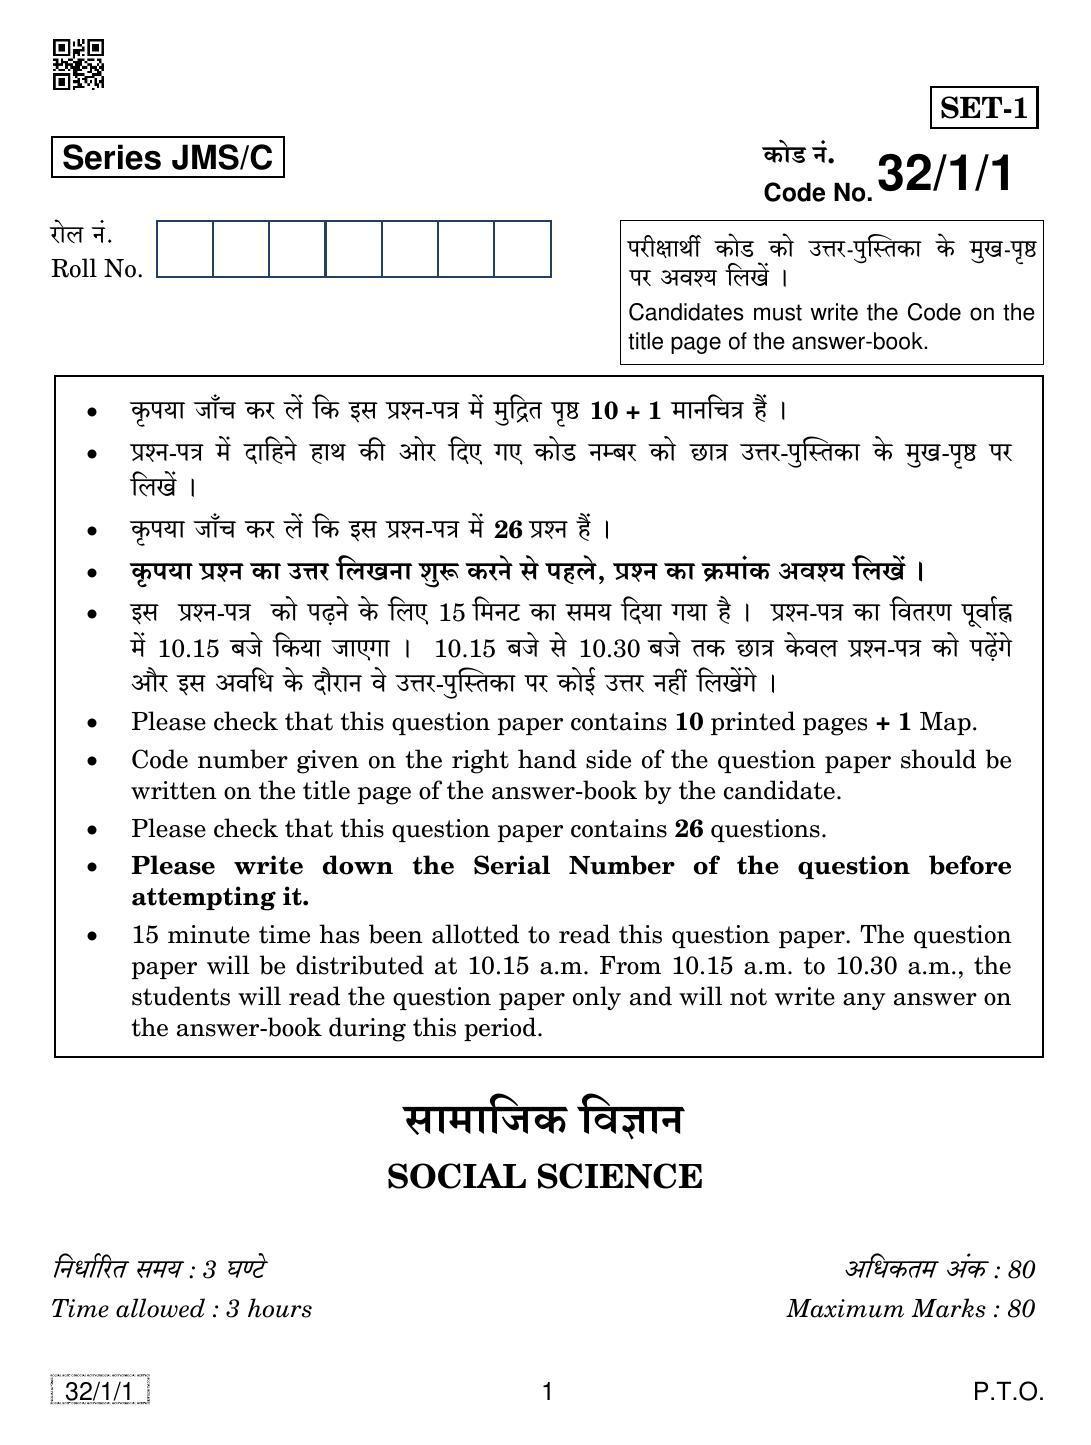 CBSE Class 10 32-1-1 SOCIAL SCIENCE 2019 Compartment Question Paper - Page 1